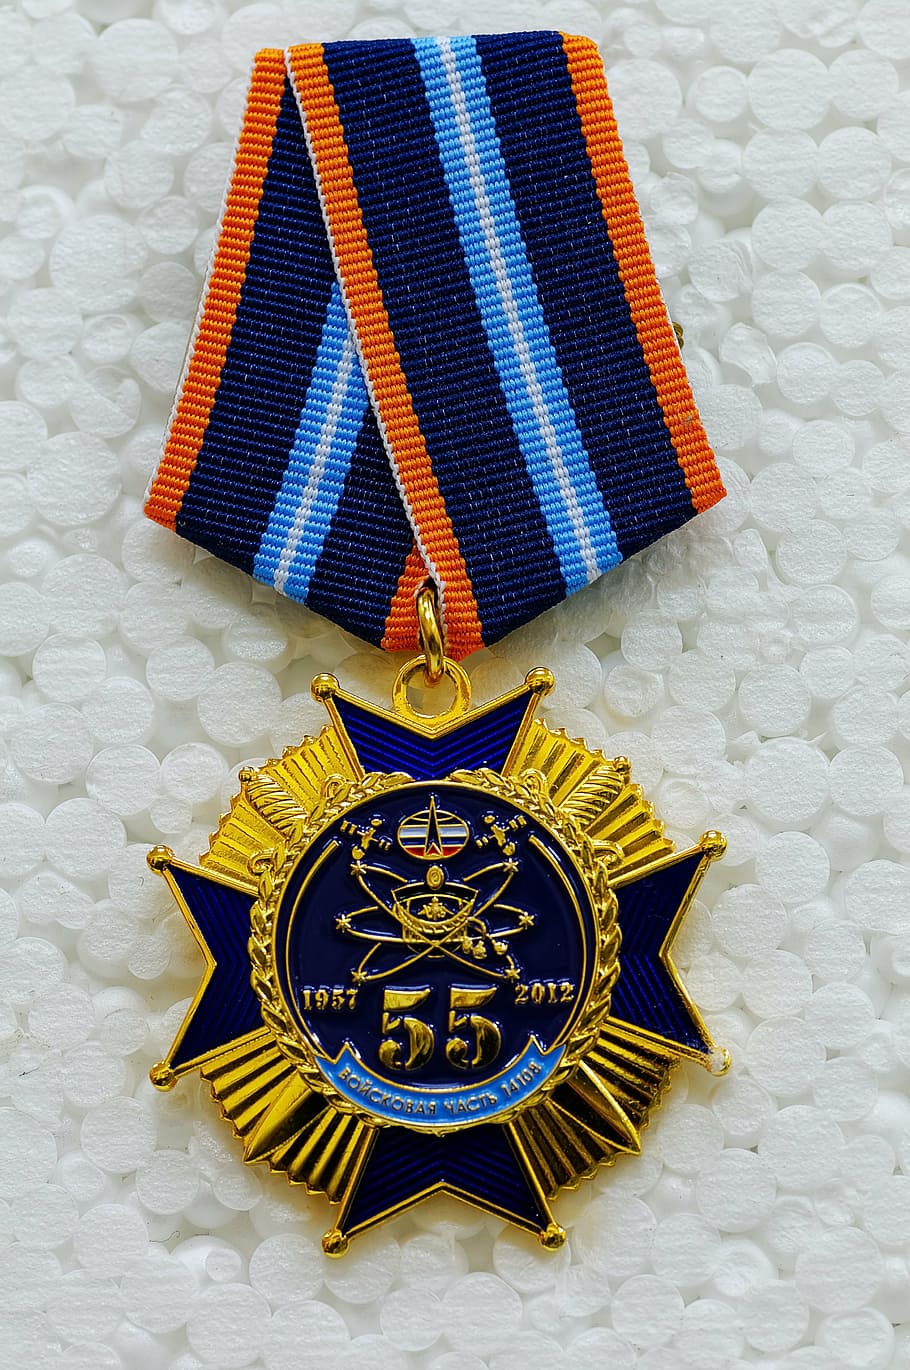 gold-colored medal, medal, commemorative medal, jubilee medal, space forces, russia, award, wall - building feature, blue, pattern